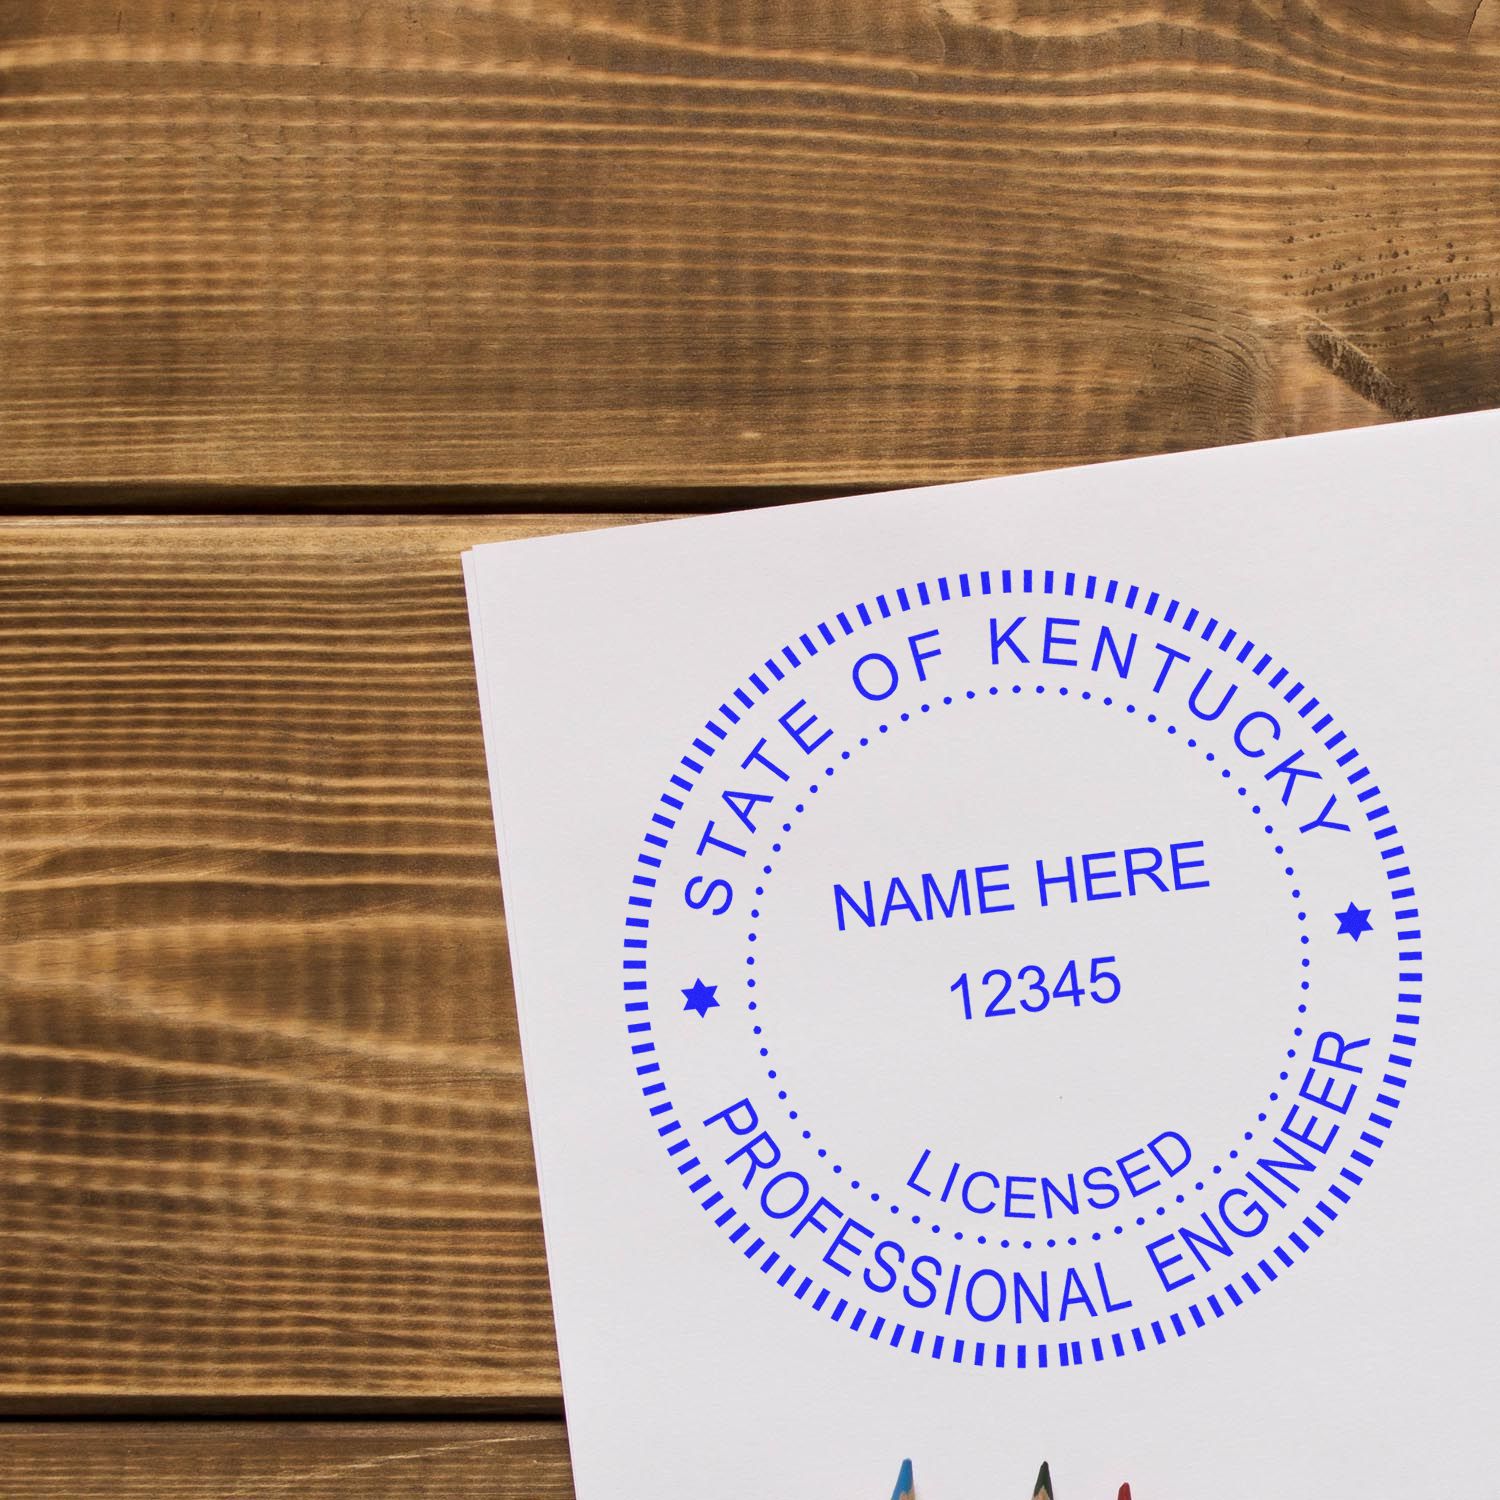 Demystifying Kentucky Engineering Seal Regulations: What You Need to Know Feature Image